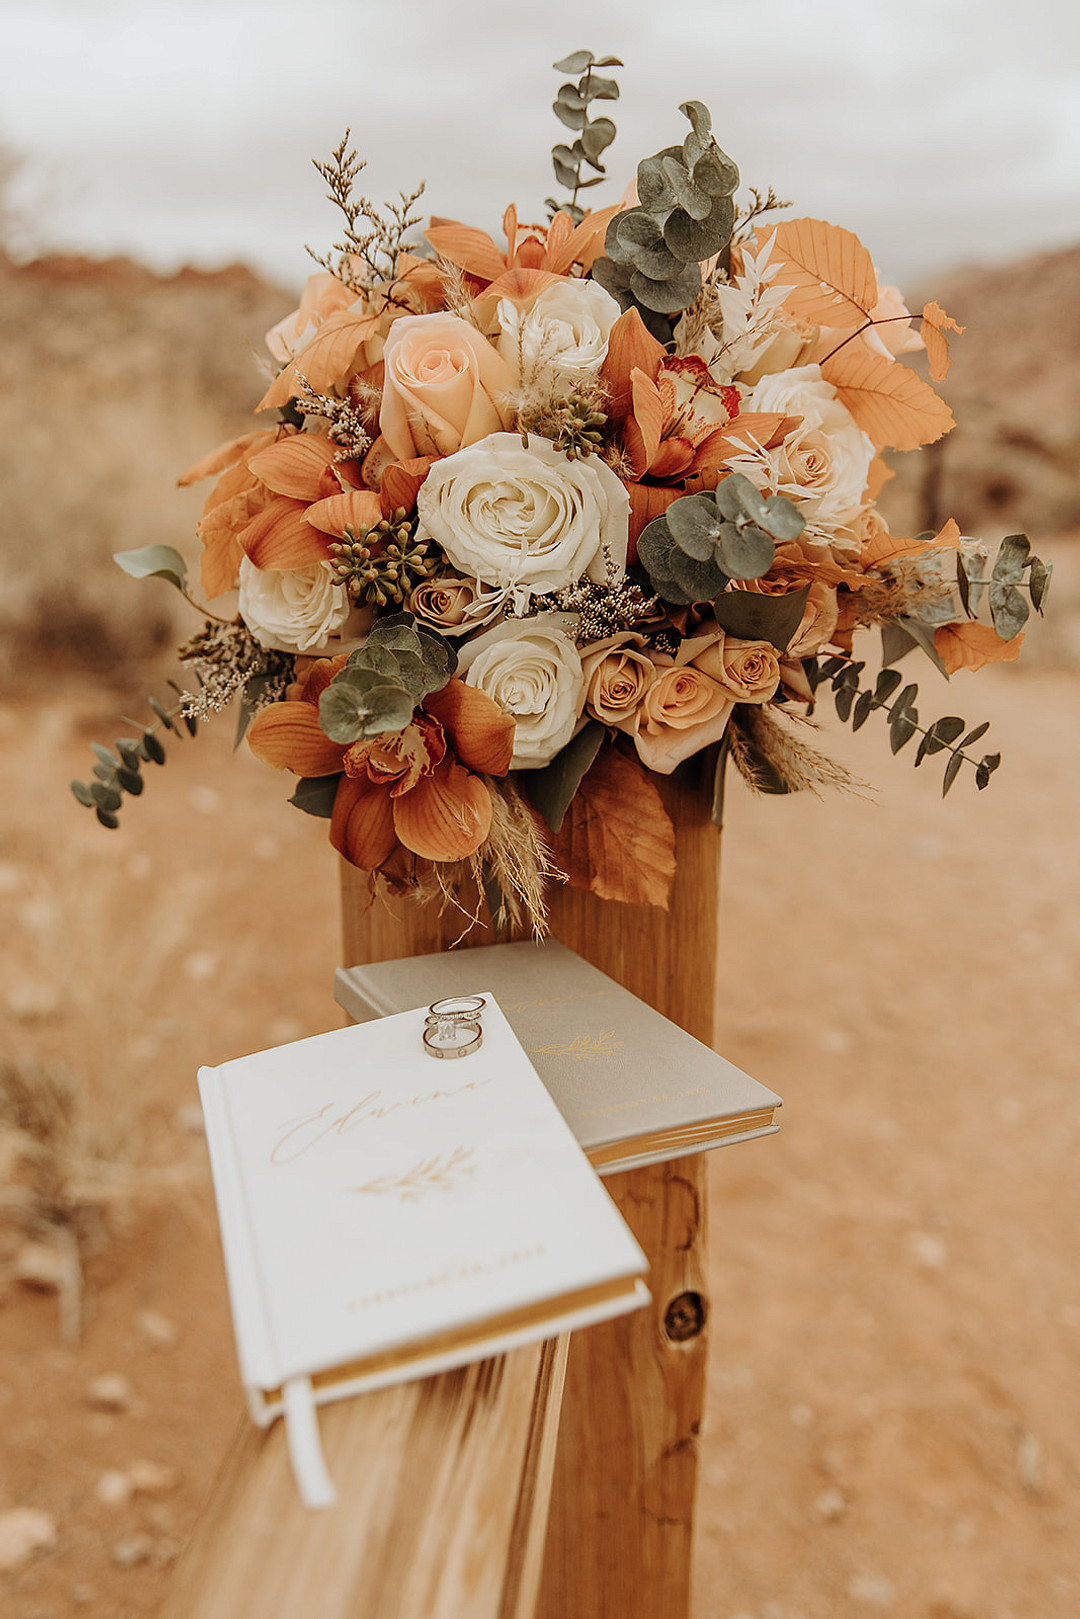 Wedding bouquet with white and peach roses, orange leaves, coral orange gladiolas, eucalyptus leaves and pampas grass. Also pictured: two brides vow books plus their wedding rings.